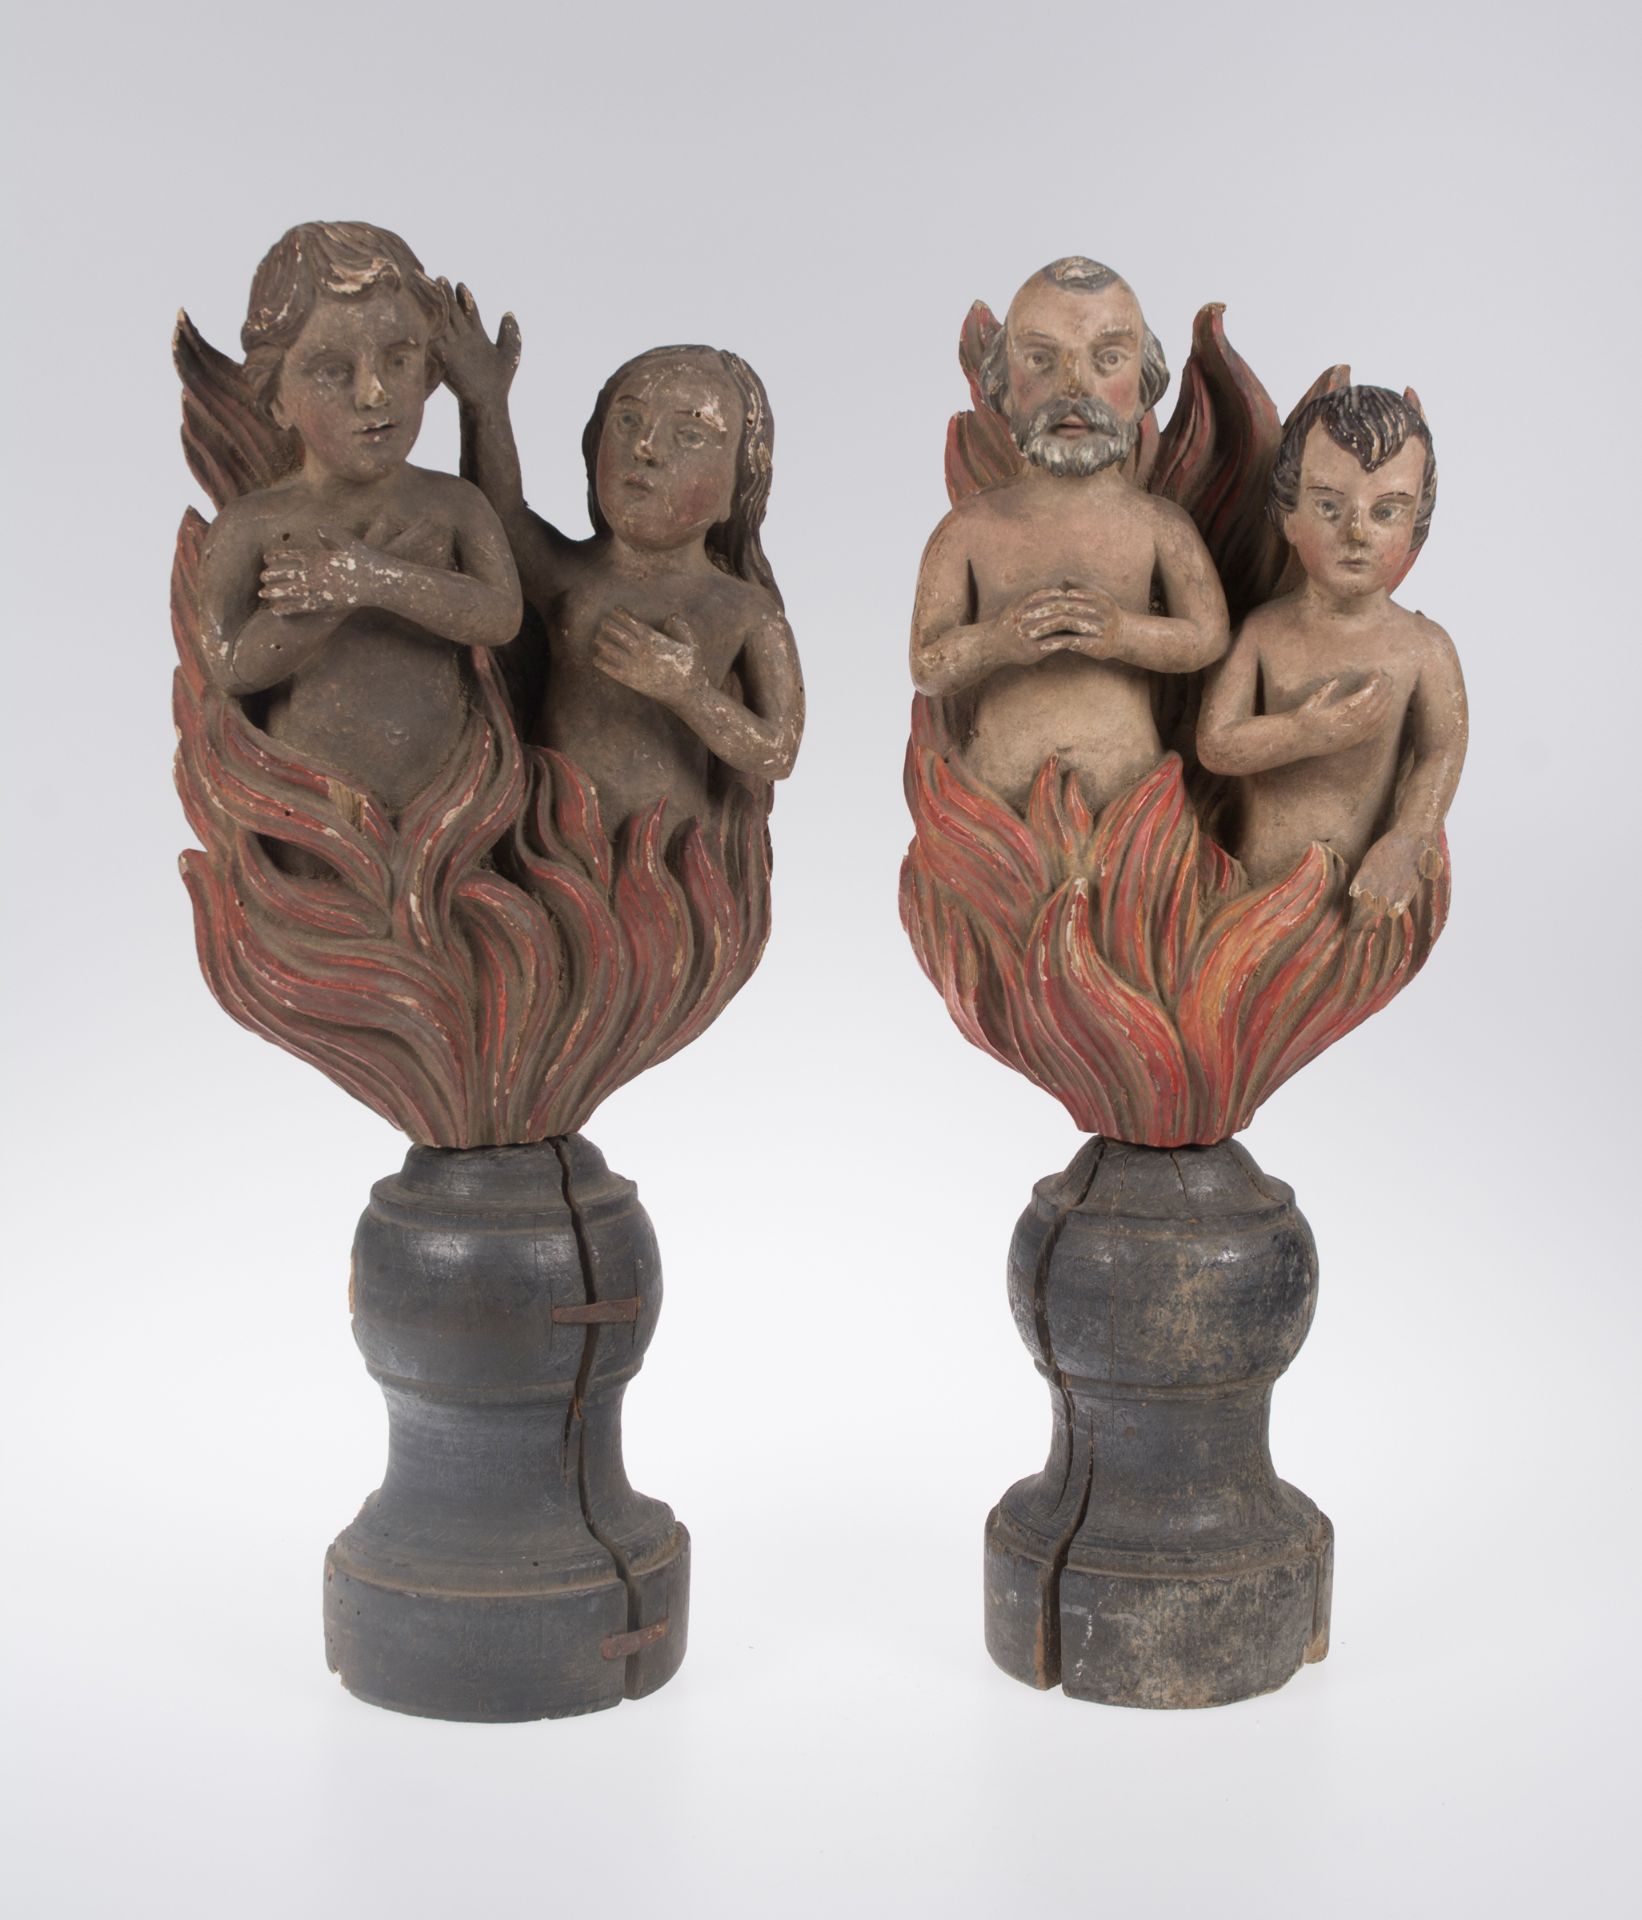 "Souls in Purgatory". Pair of carved and polychromed wooden sculptures. 17th century.